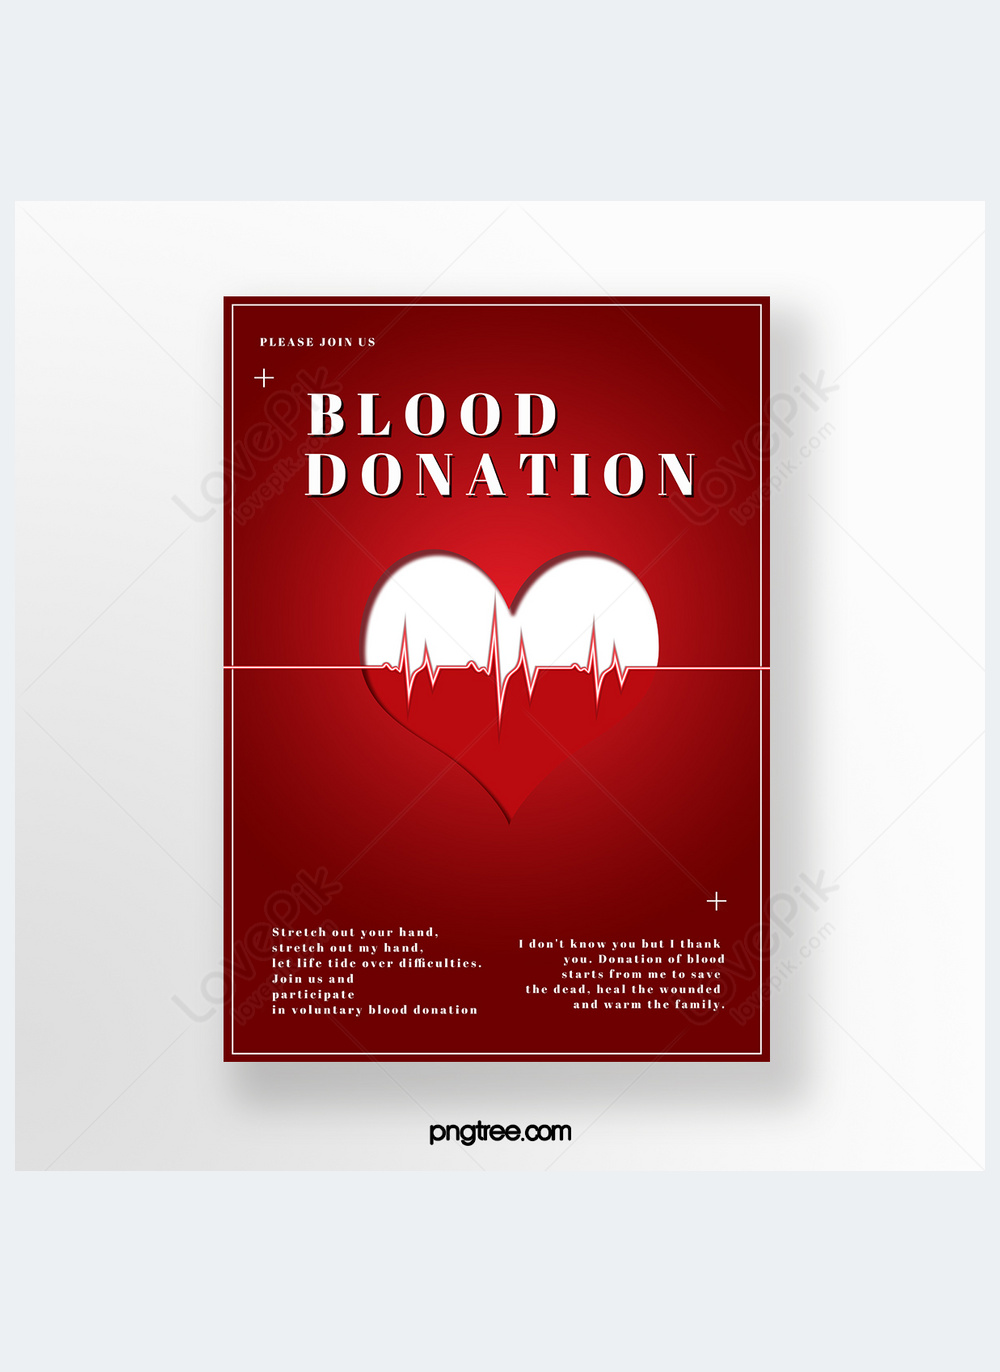 Poster on blood donation – India NCC